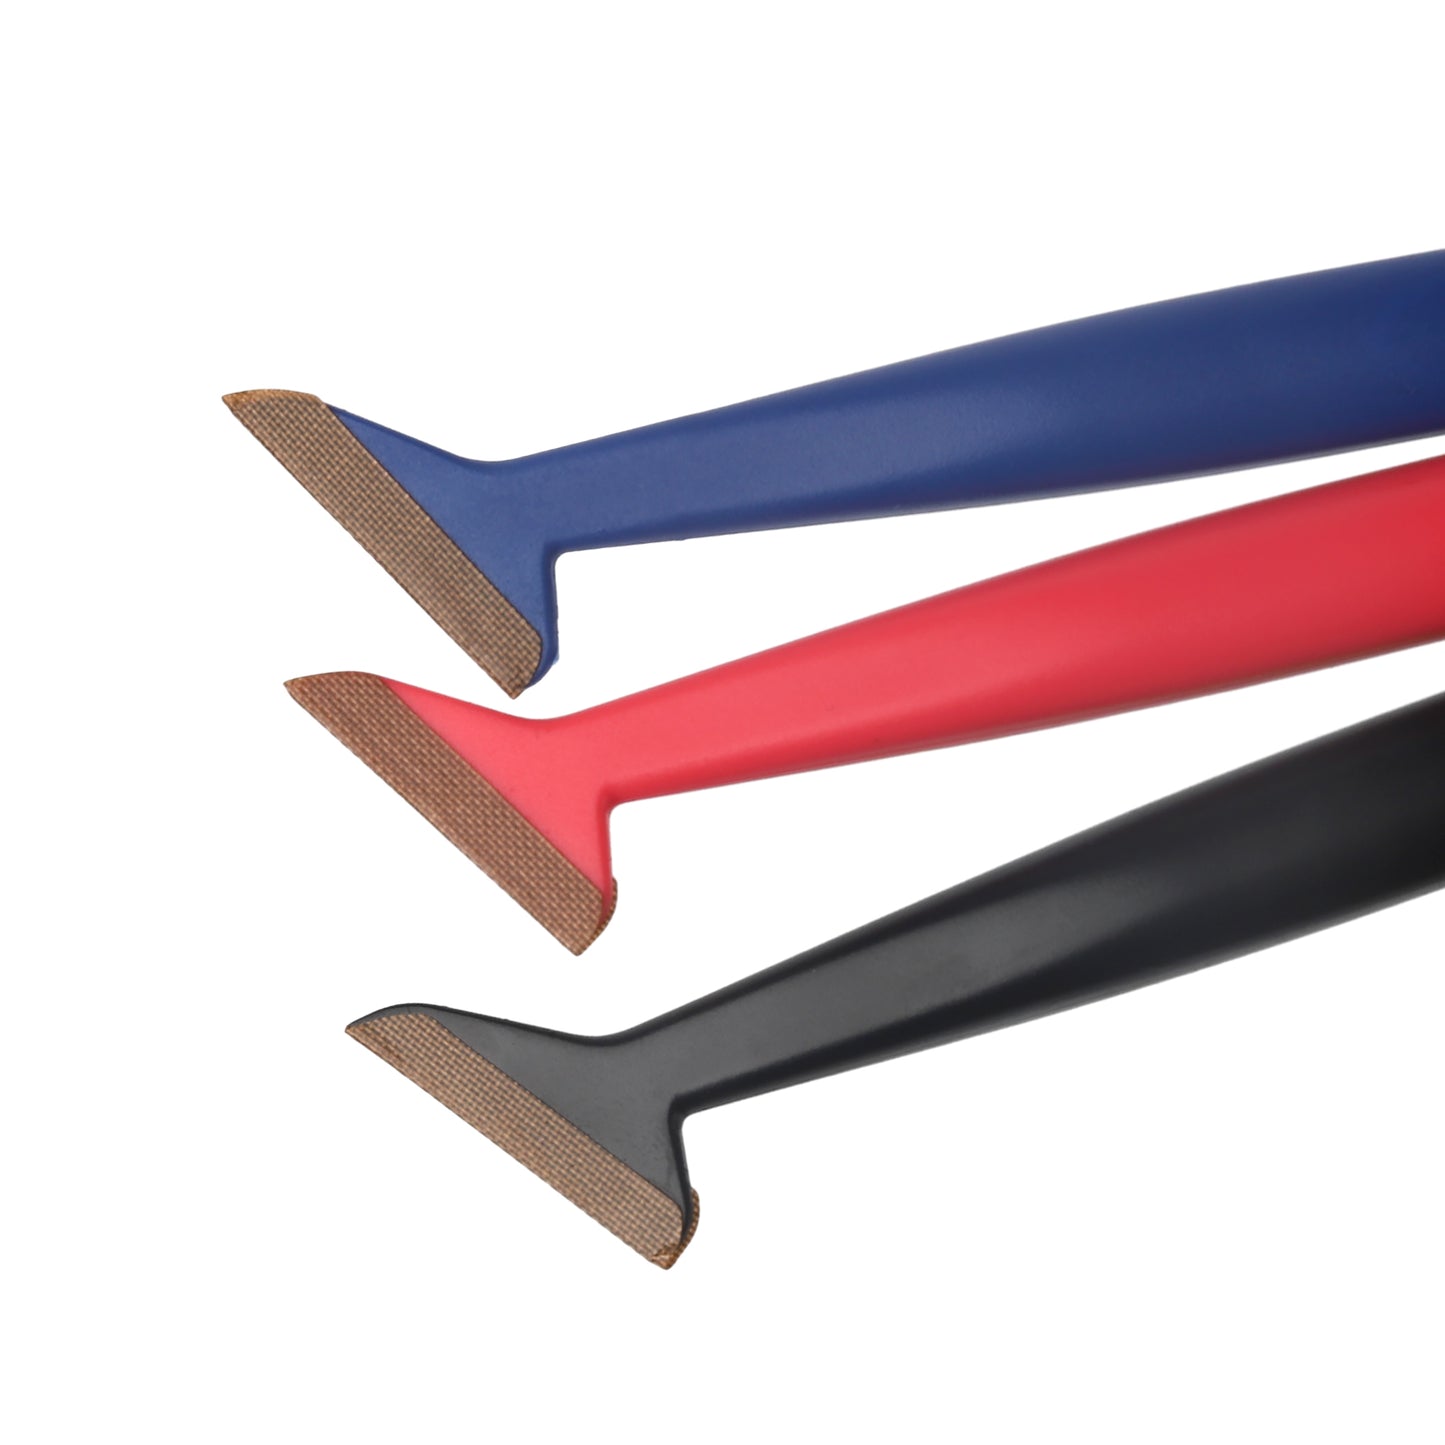 3-Piece Vinyl Wrap Tuck Tool Set showcasing tools in blue, red, and black for diverse wrapping needs.